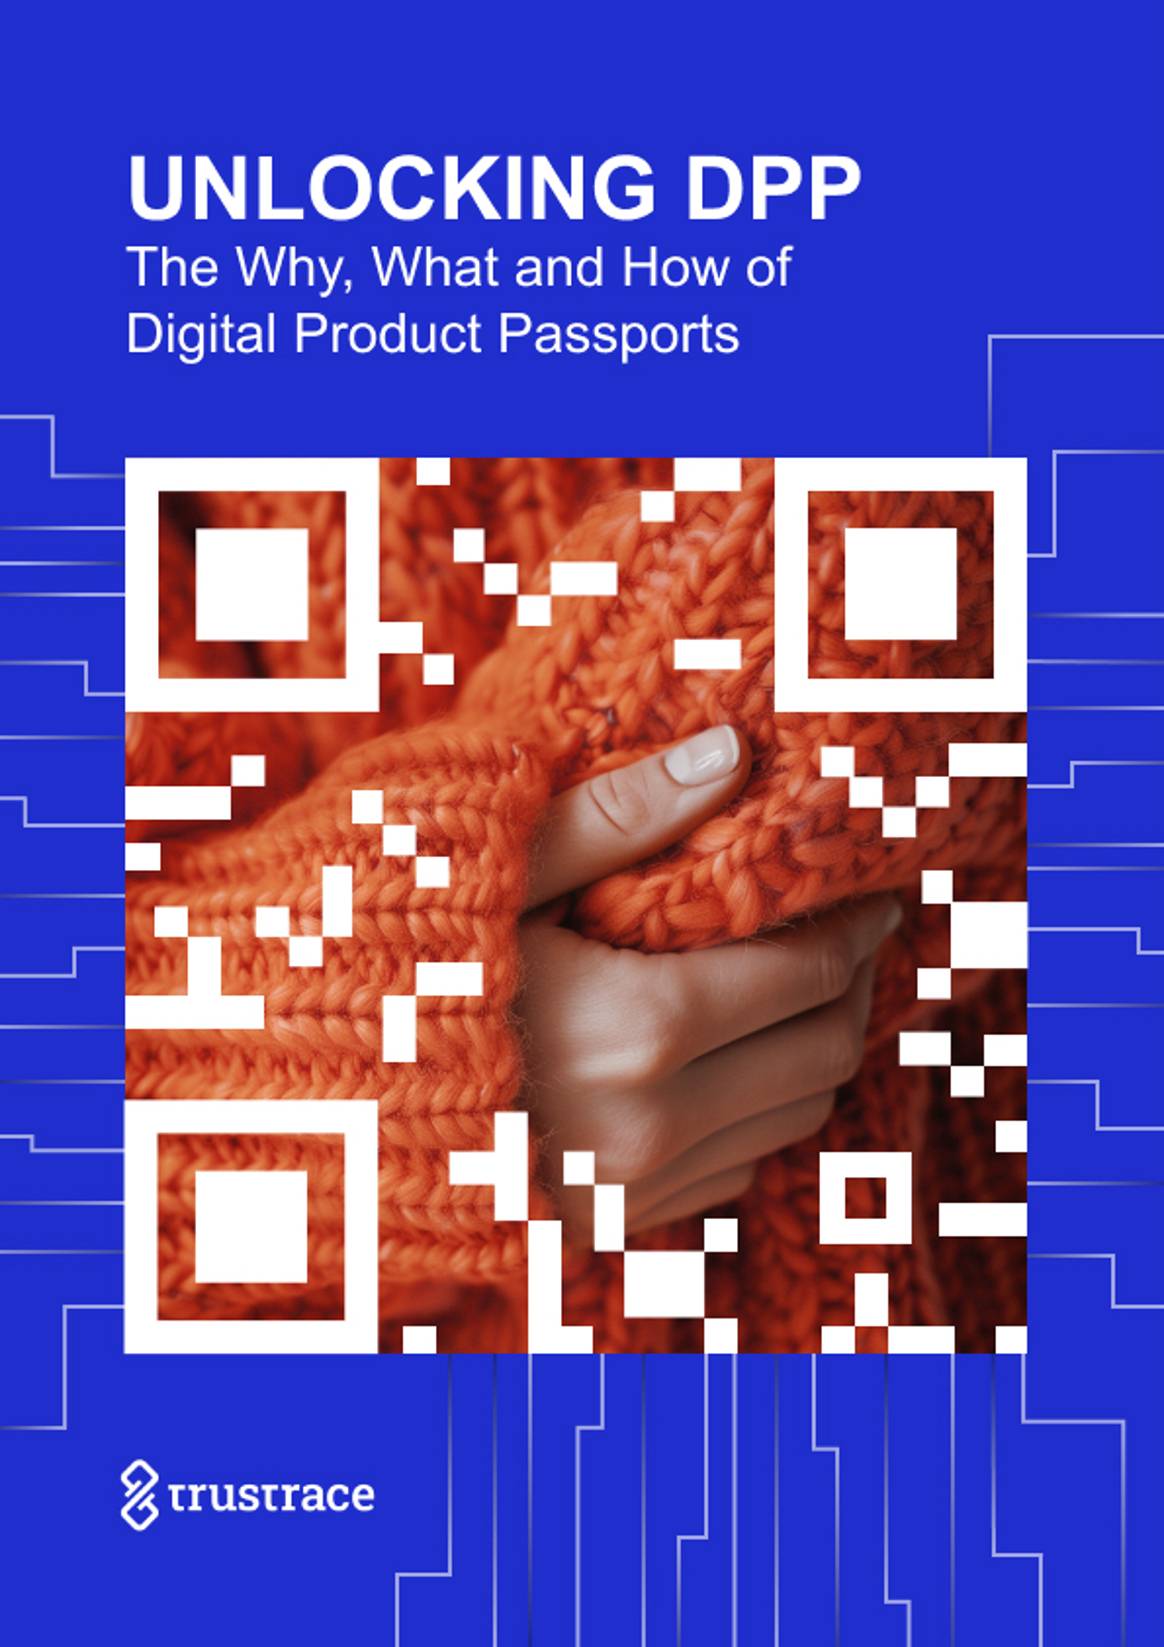 “Unlocking DPP. The Why, What and How of Digital Product Passports”.